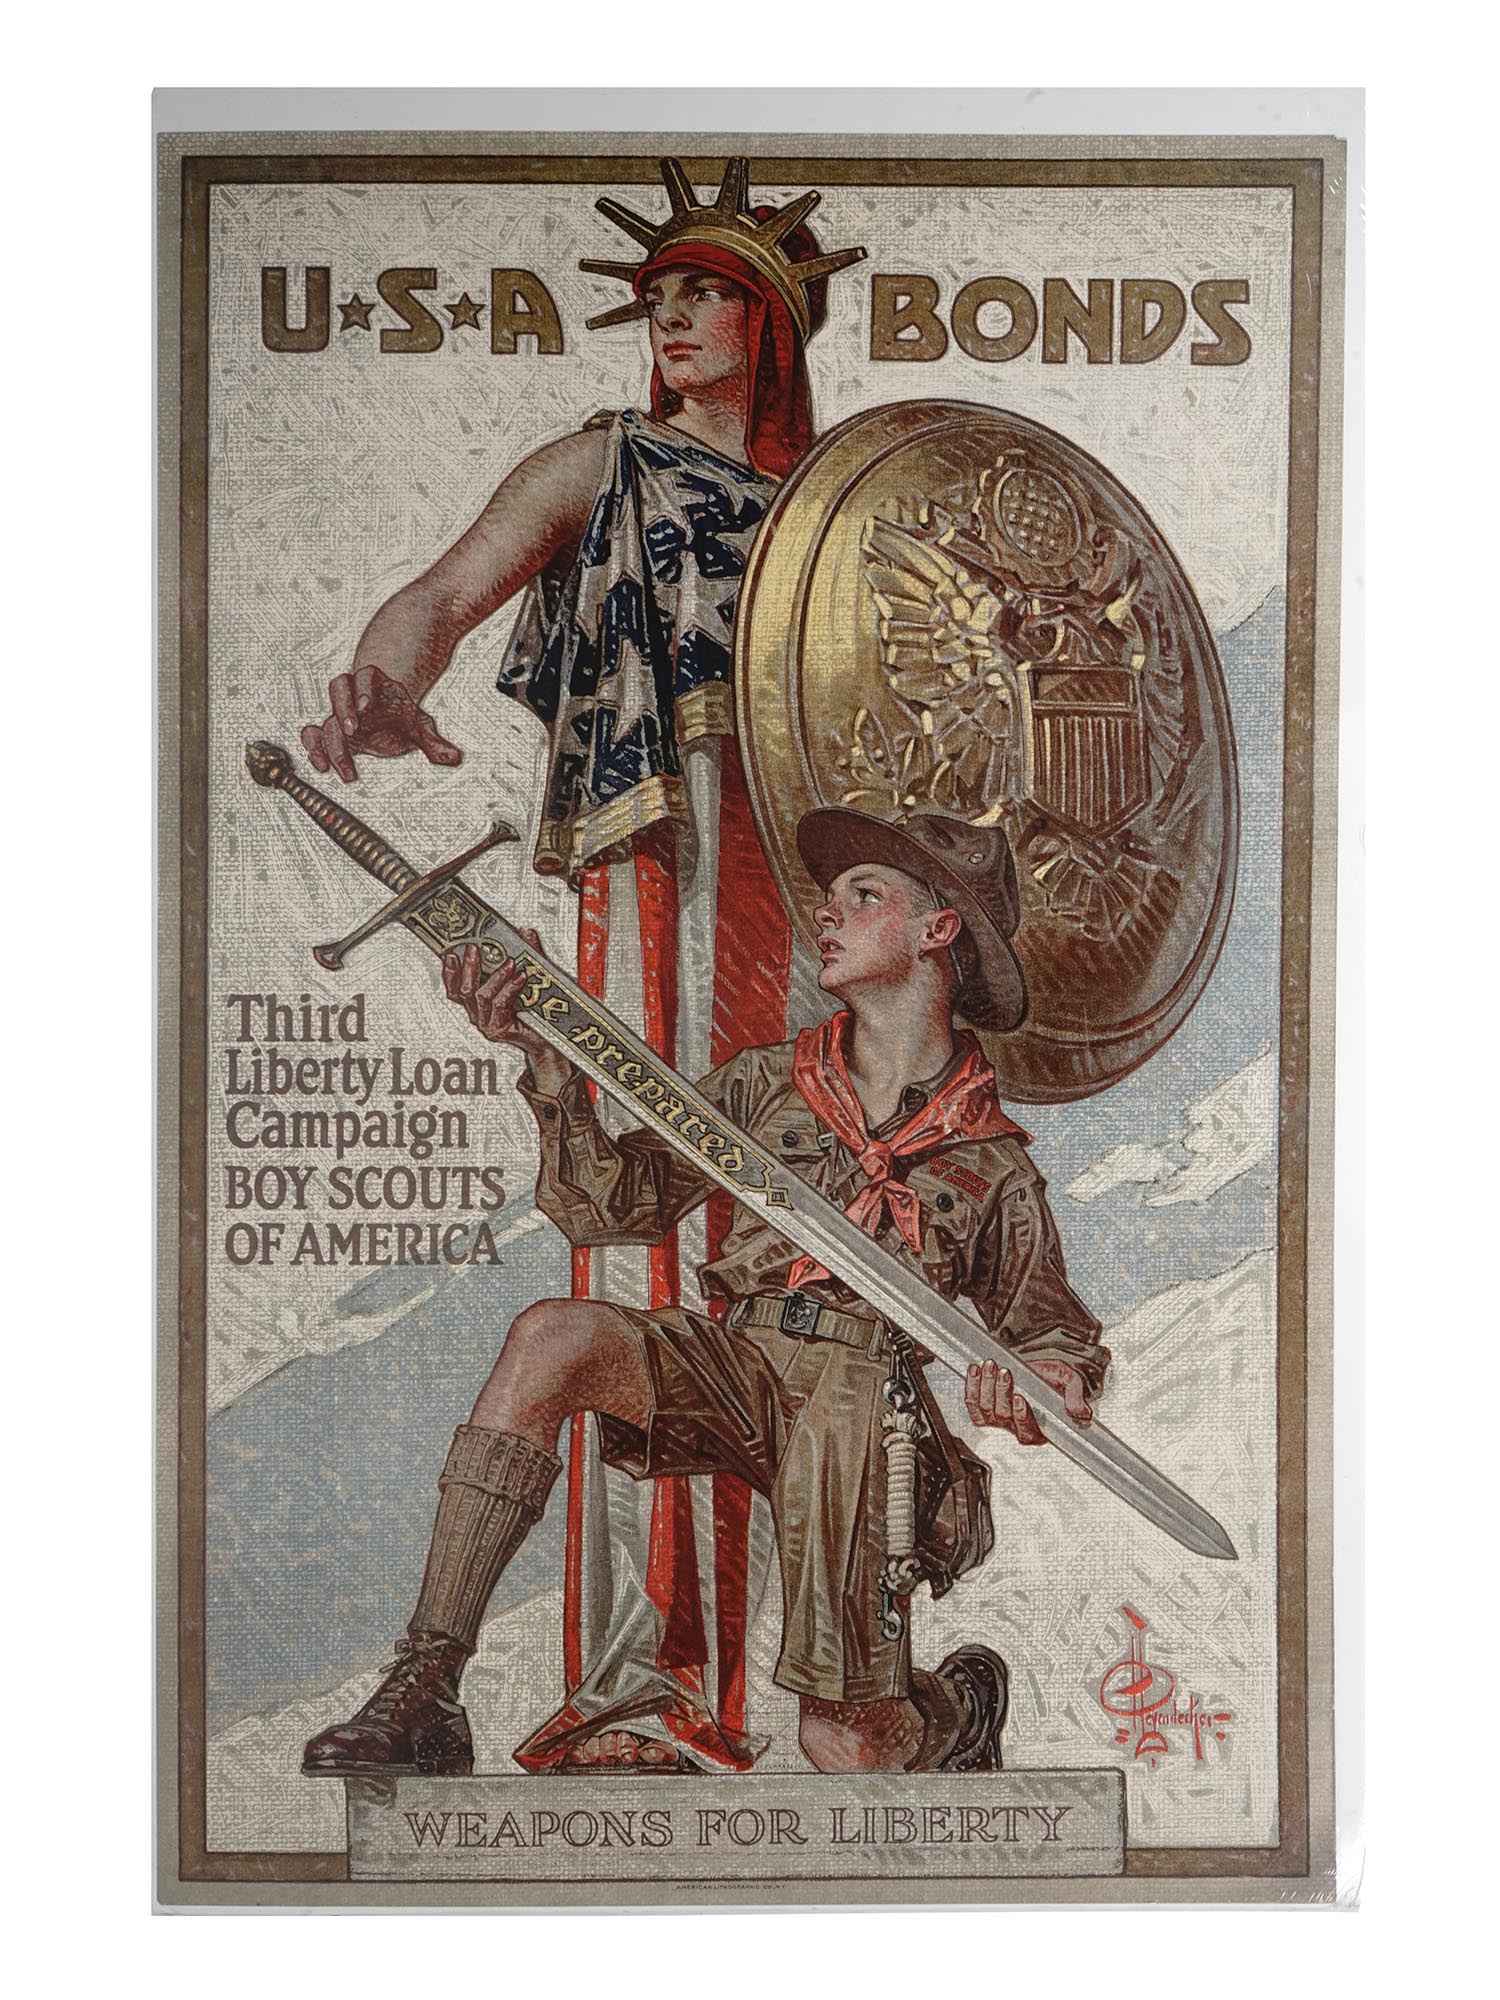 USA BONDS WEAPONS FOR LIBERTY POSTER LEYENDECKER